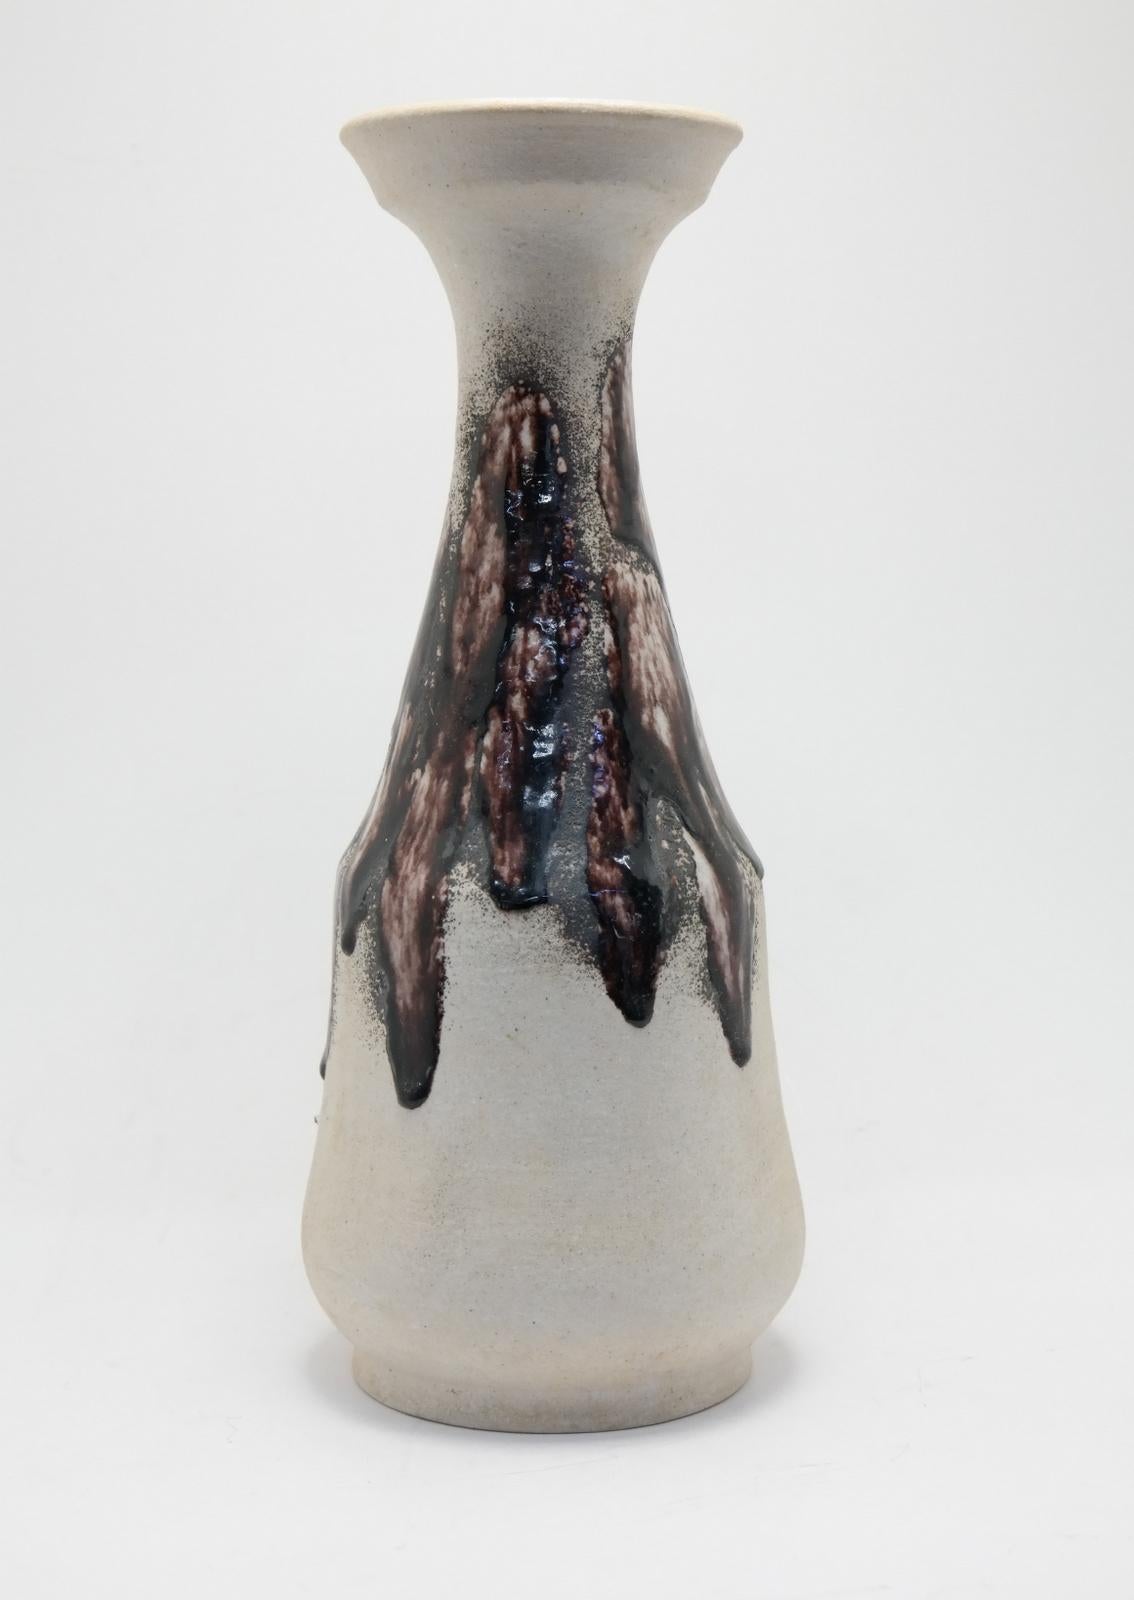 Glazed and unglazed textures, nice pastelle color on this Eva Bod vase, signed on the base.